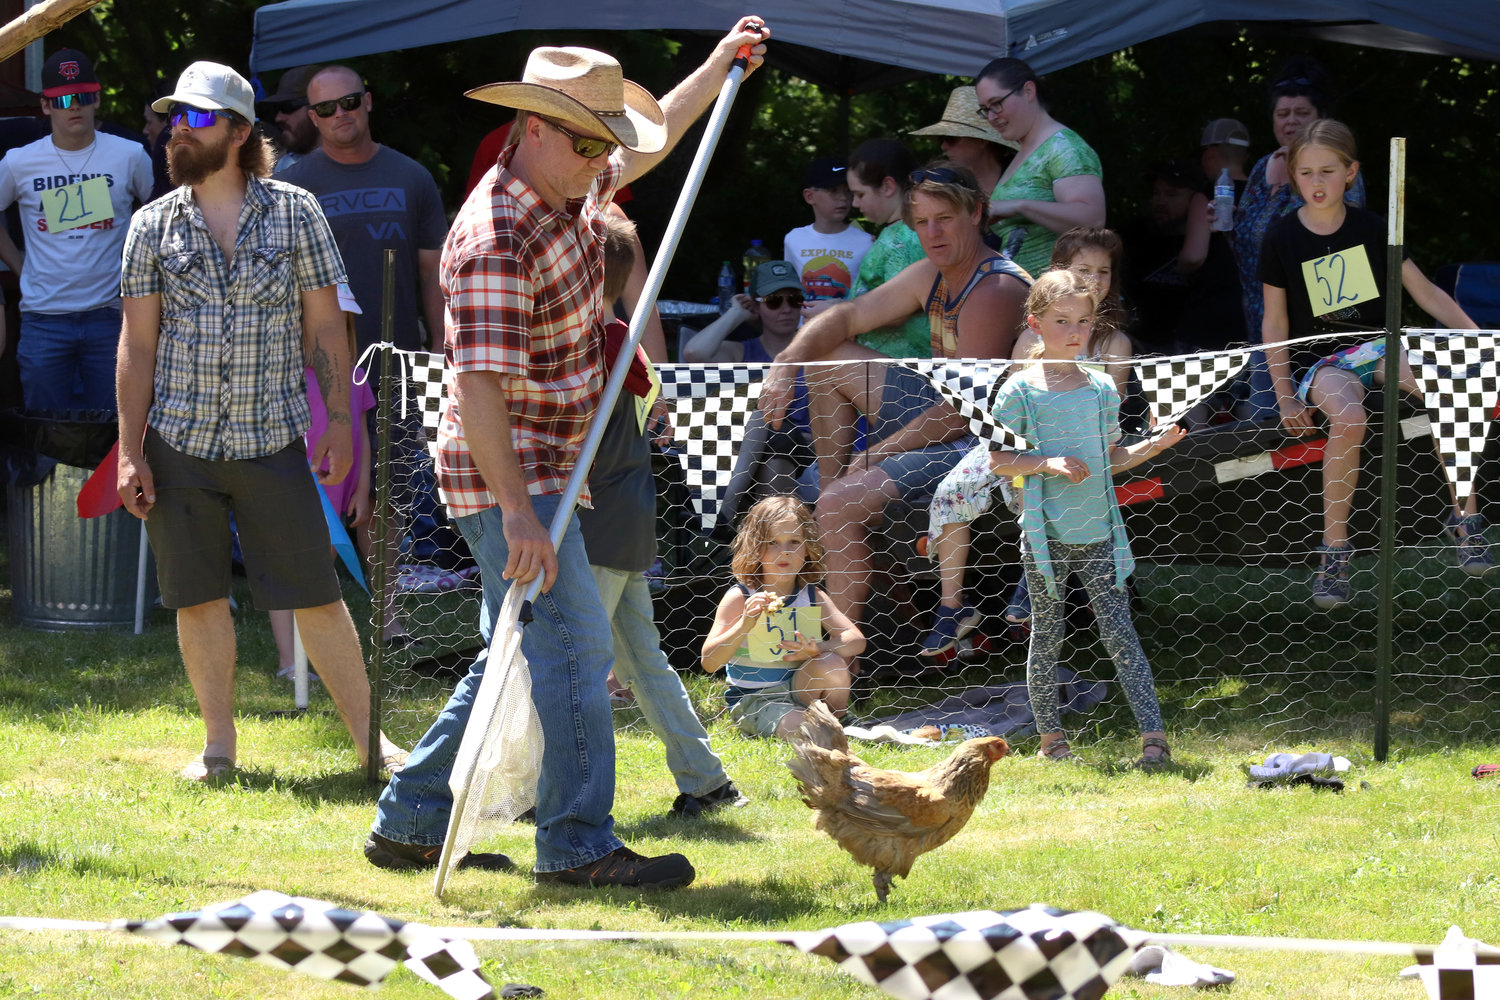 A volunteer prepares to scoop up a chicken with a net during Independence Valley Community Hall’s 42nd Annual Chicken Races in Rochester on Sunday.